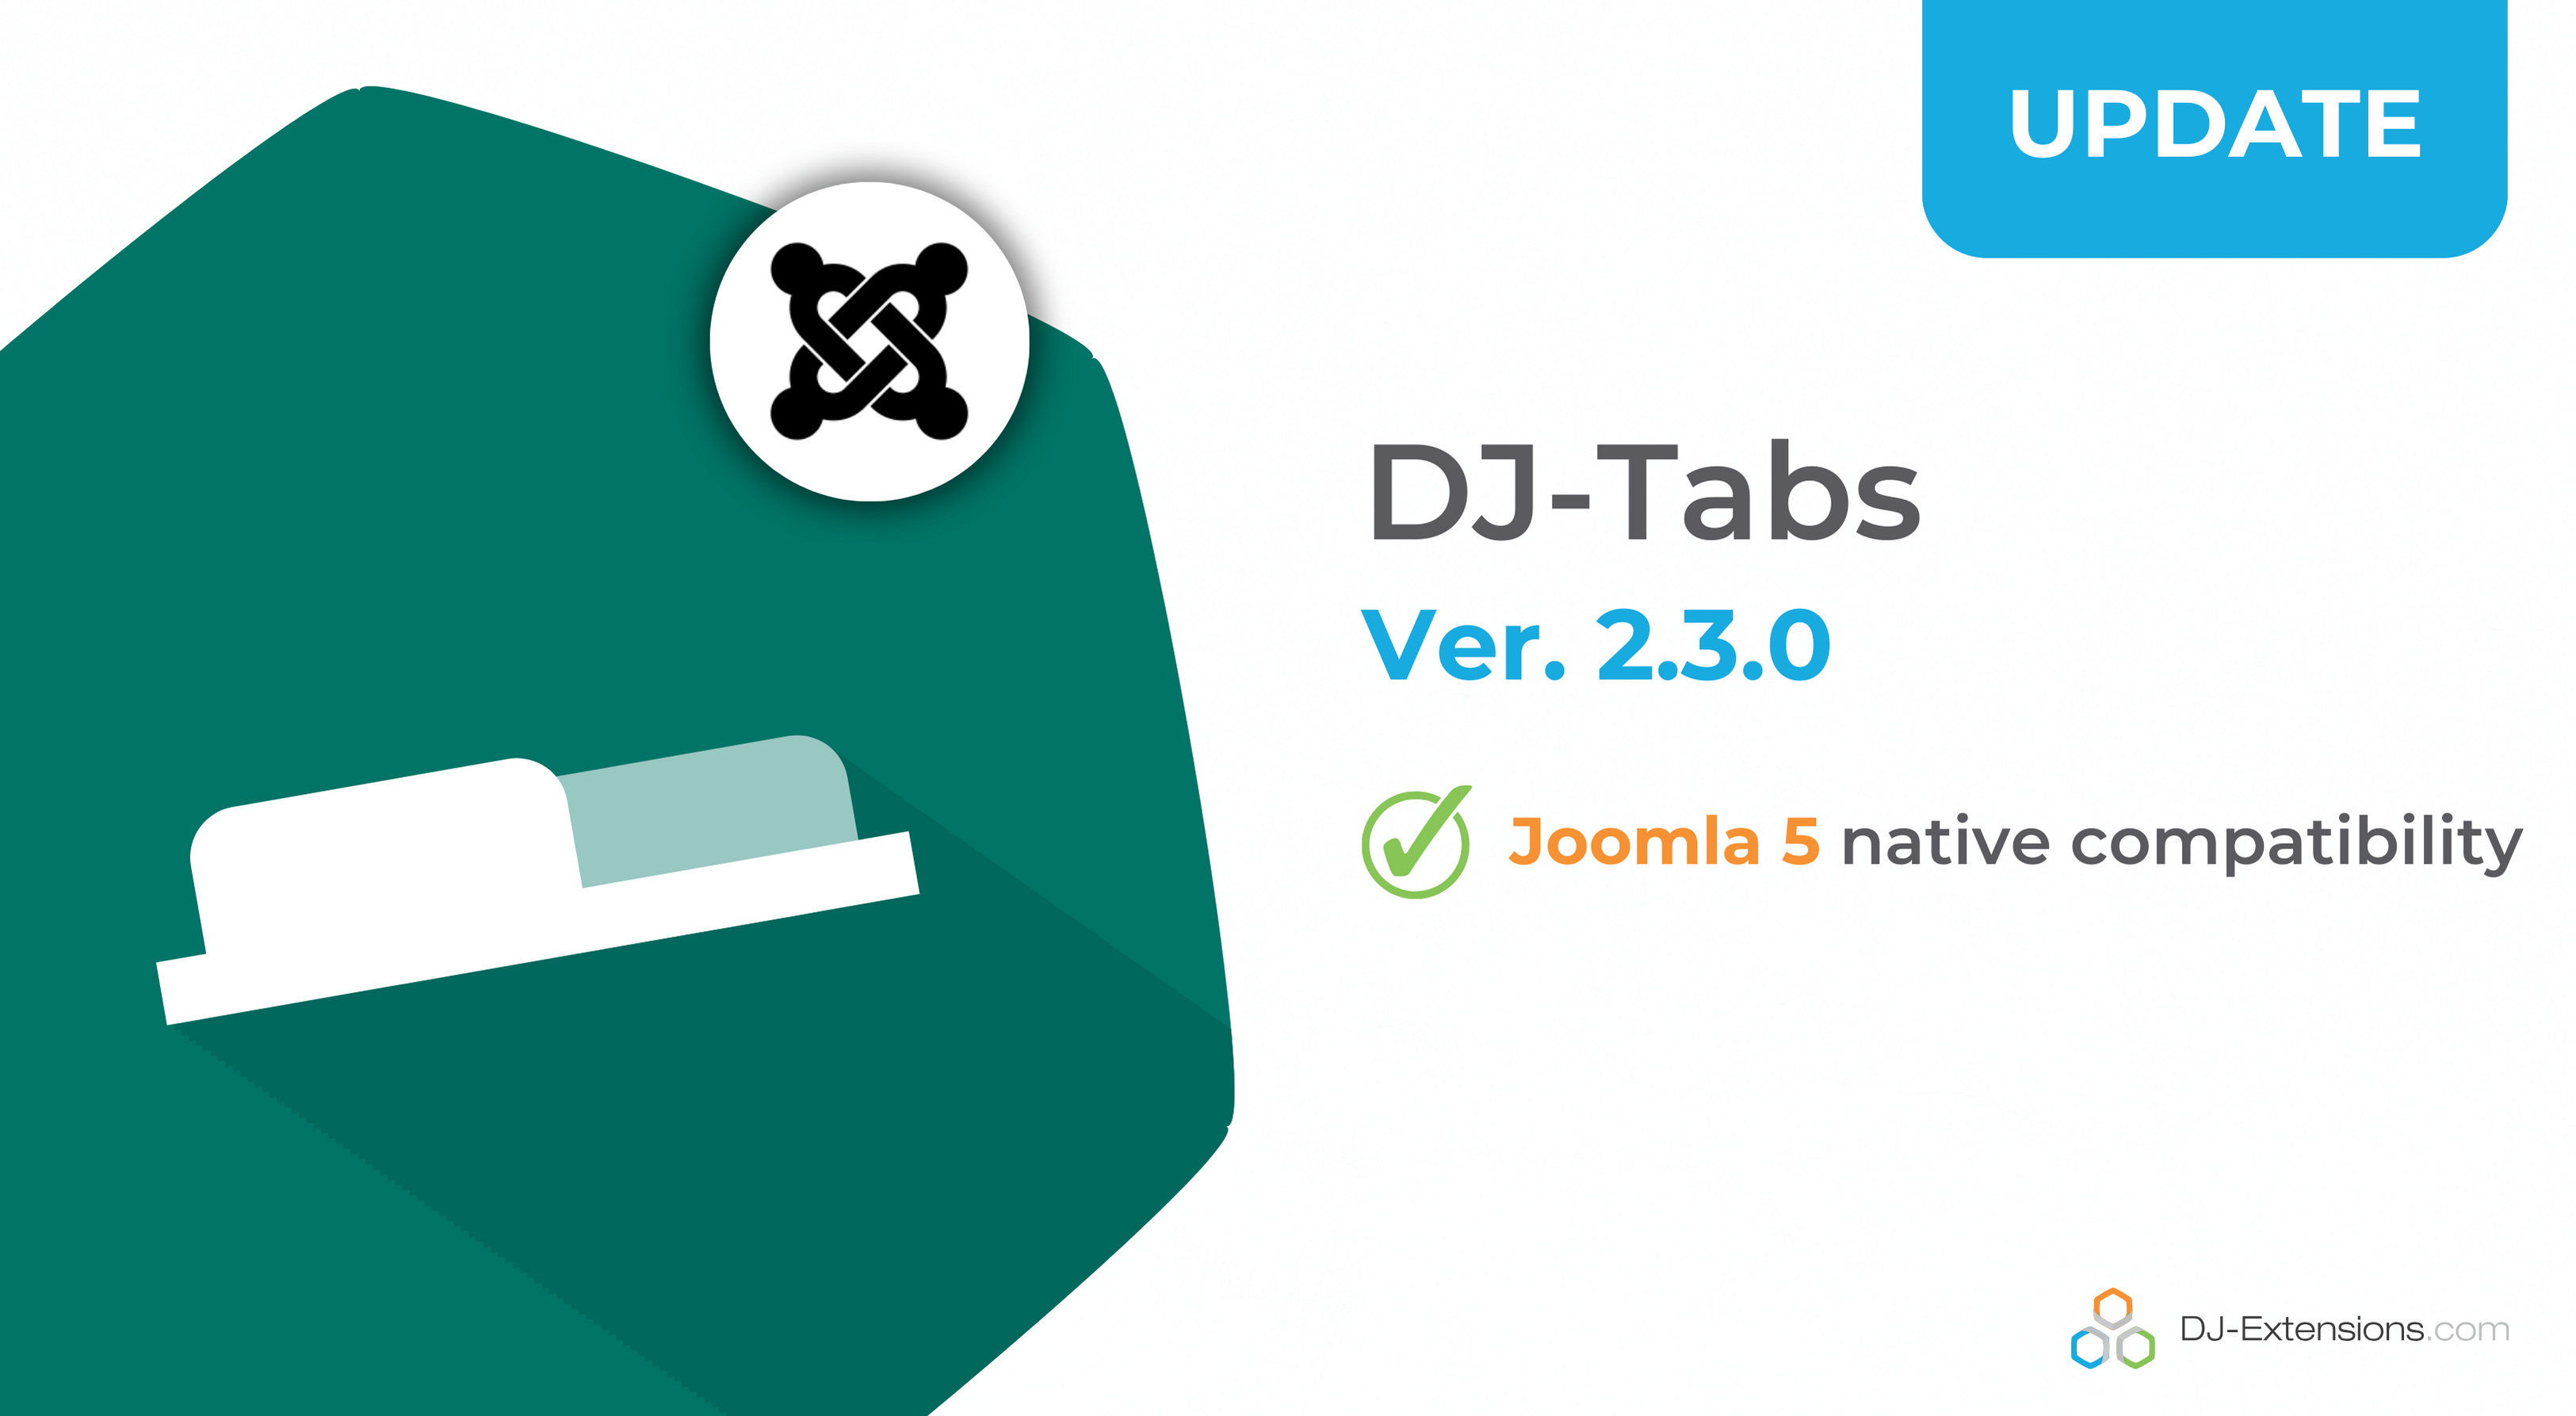 [UPDATE] DJ-Tabs extension ver. 2.3.0 brings the Joomla 5 Native compatibility!